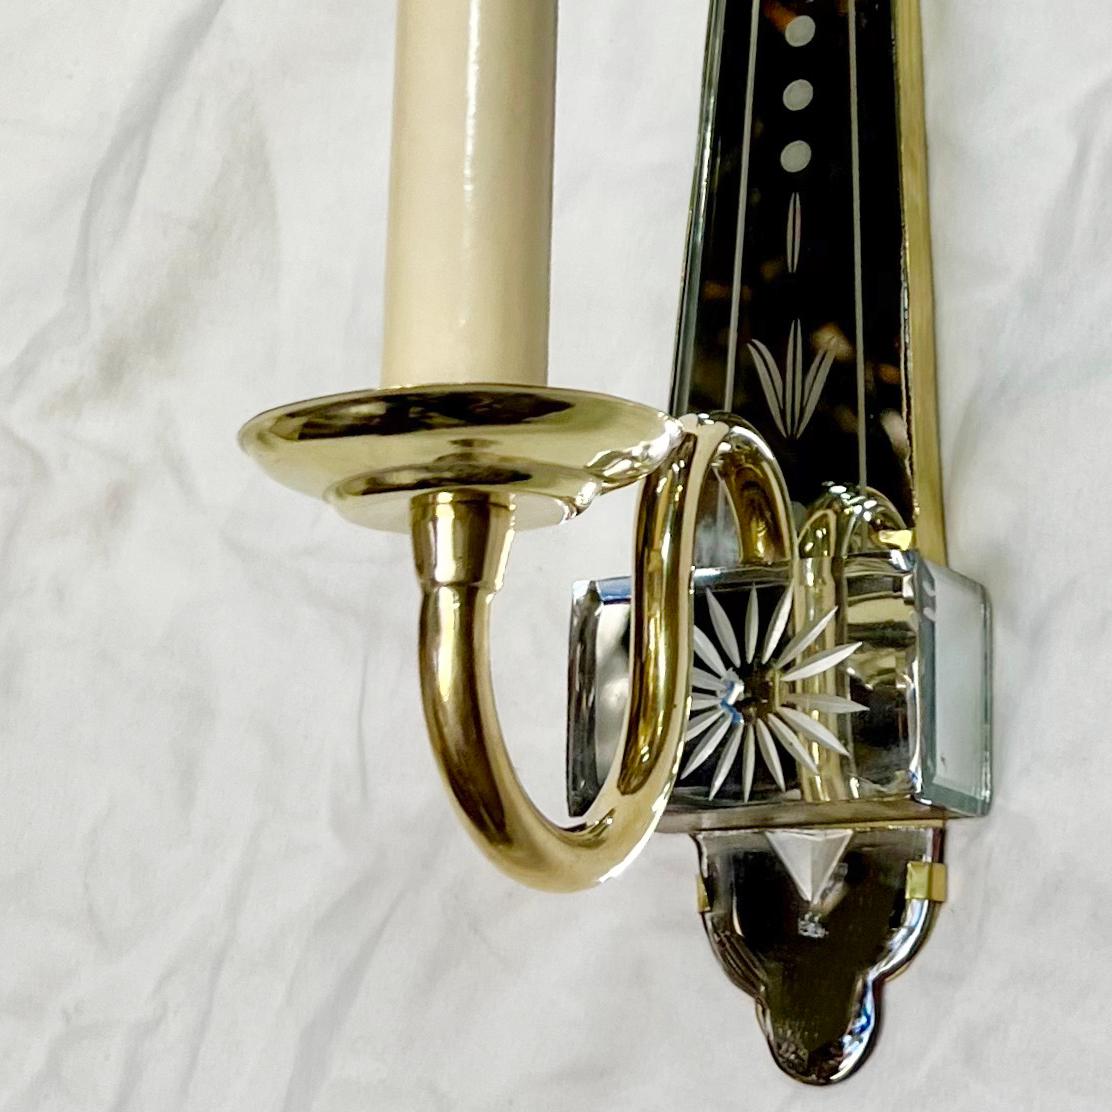 Pair of circa 1950's French single arm gilt bronze sconces with etched mirrored back.

Measurements:
Height: 11